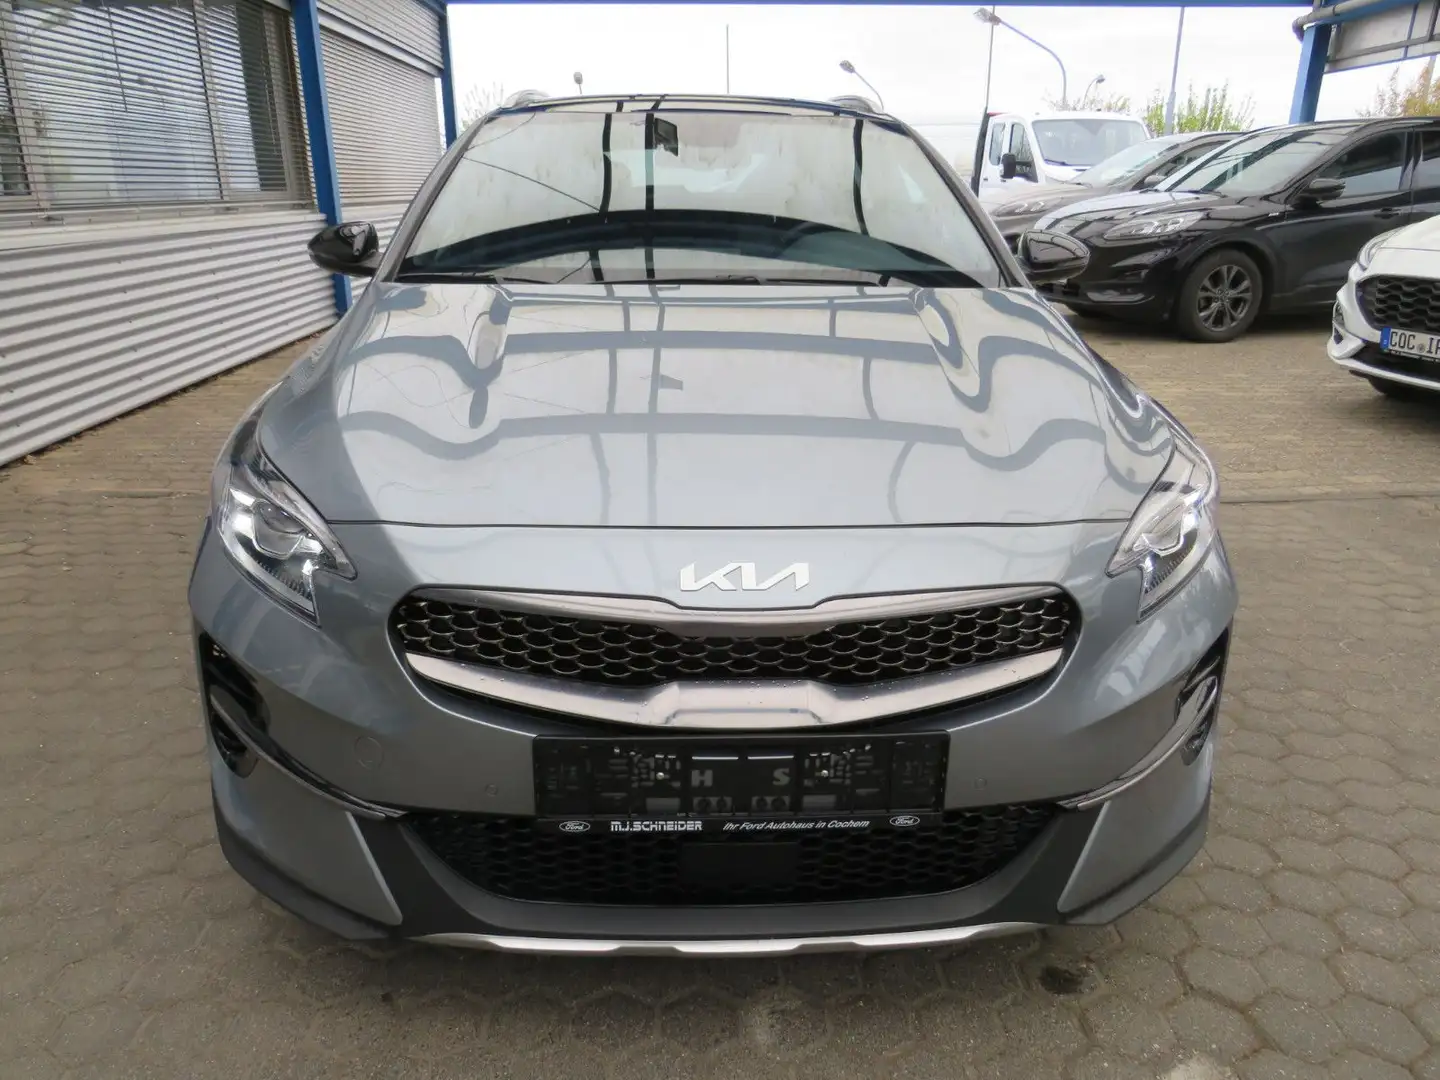 Kia XCeed Black Xdition Aut. 204PS Pano LED el. Heckklappe Silber - 2